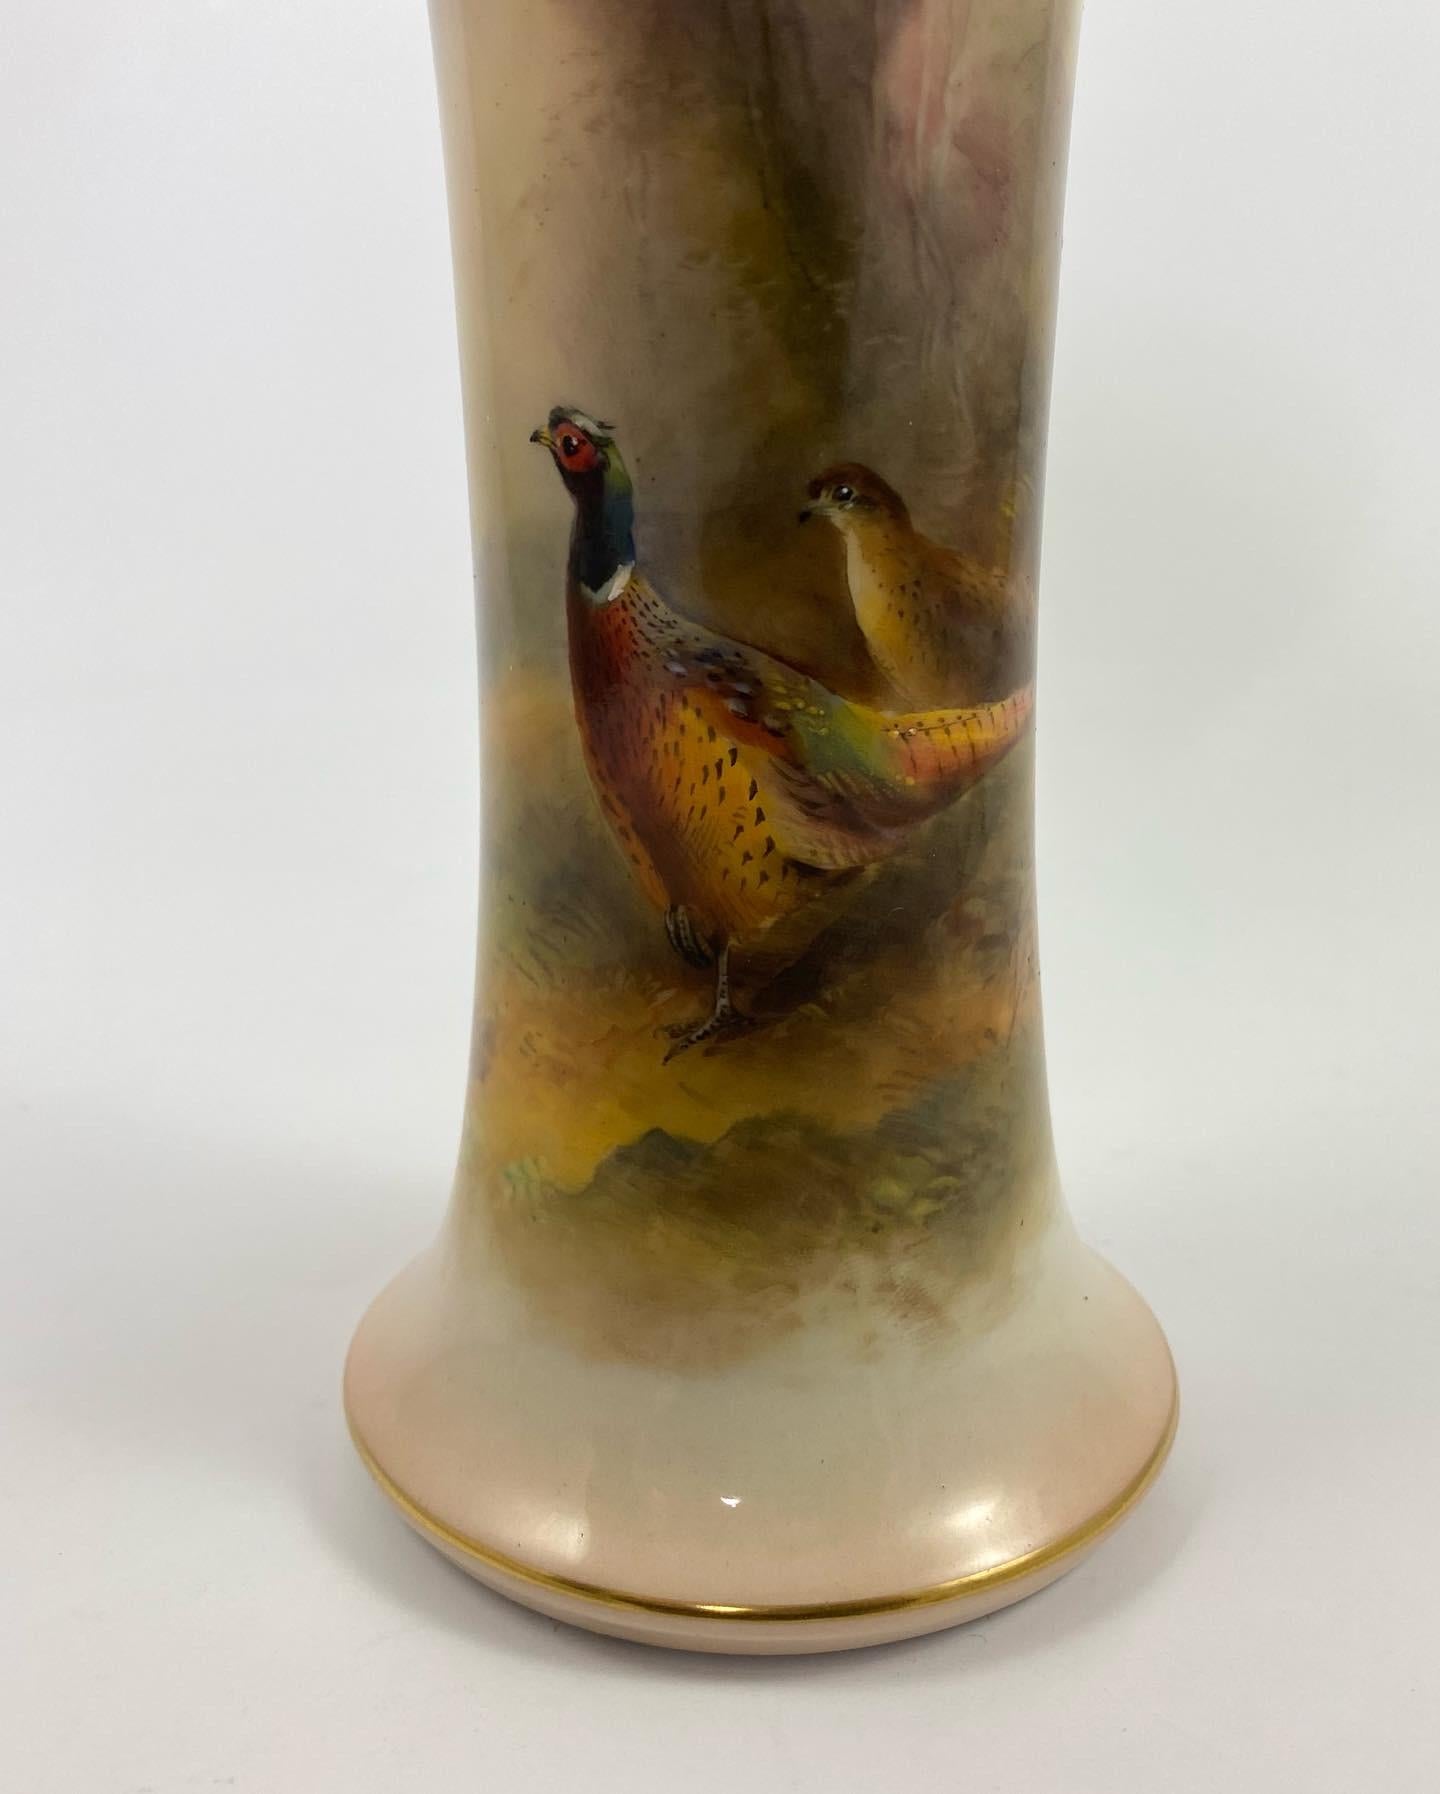 Royal Worcester porcelain vase, ‘Pheasants’, James Stinton, dated 1934. The trumpet shaped vase, finely painted by James Stinton, with pheasants in a moorland landscape, with trees in the background. Having gilt lined rims.
Signed – Jas.